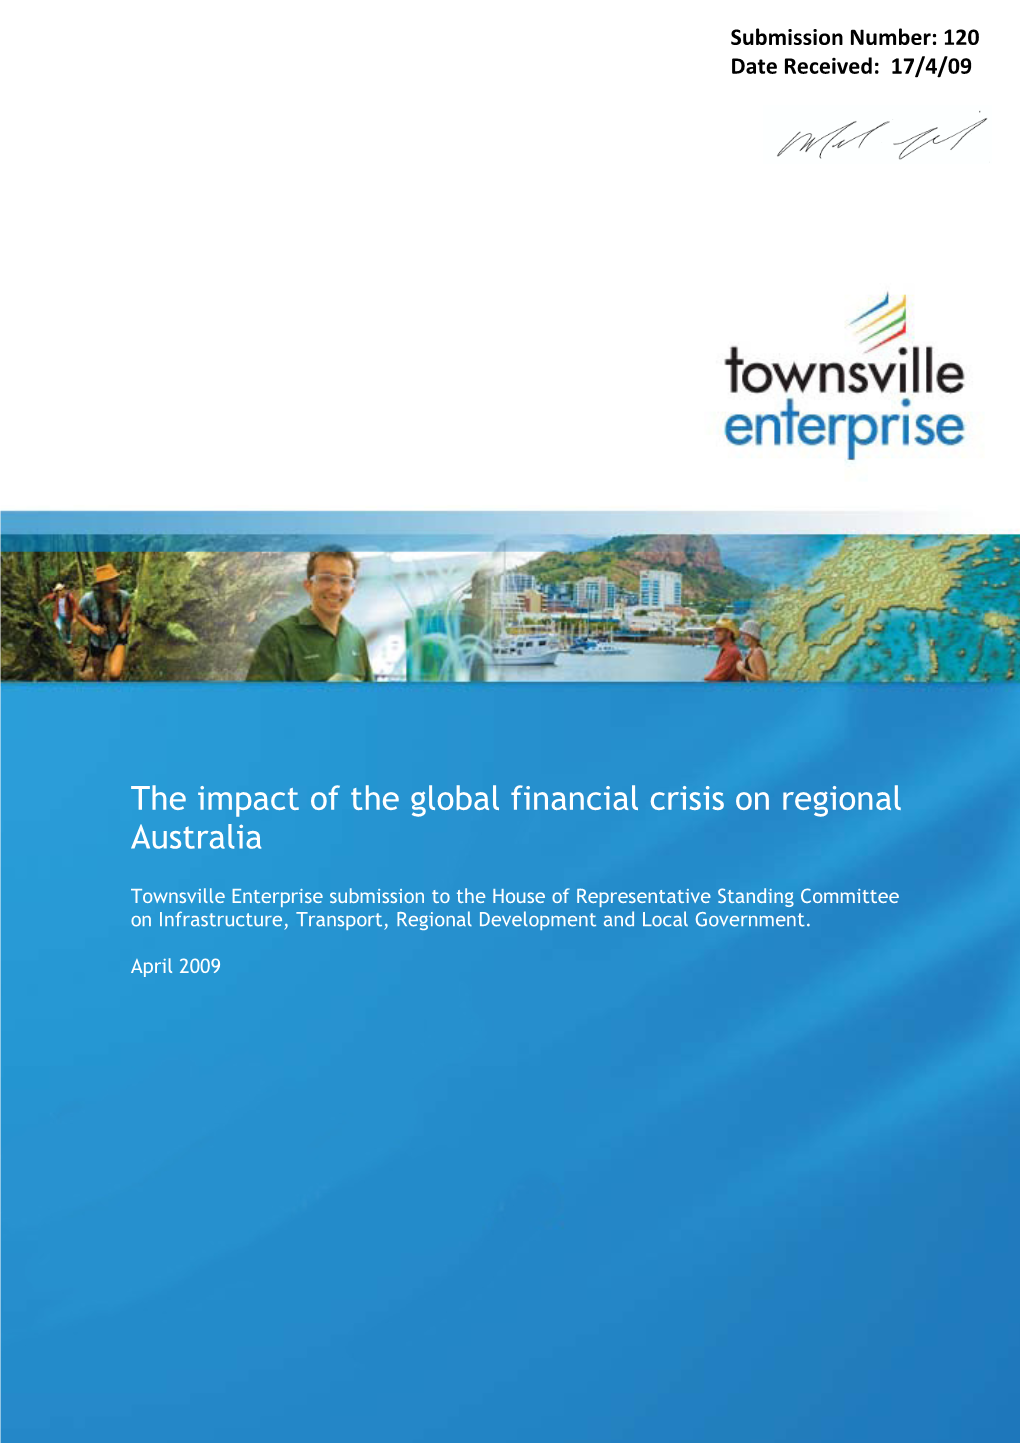 The Impact of the Global Financial Crisis on Regional Australia